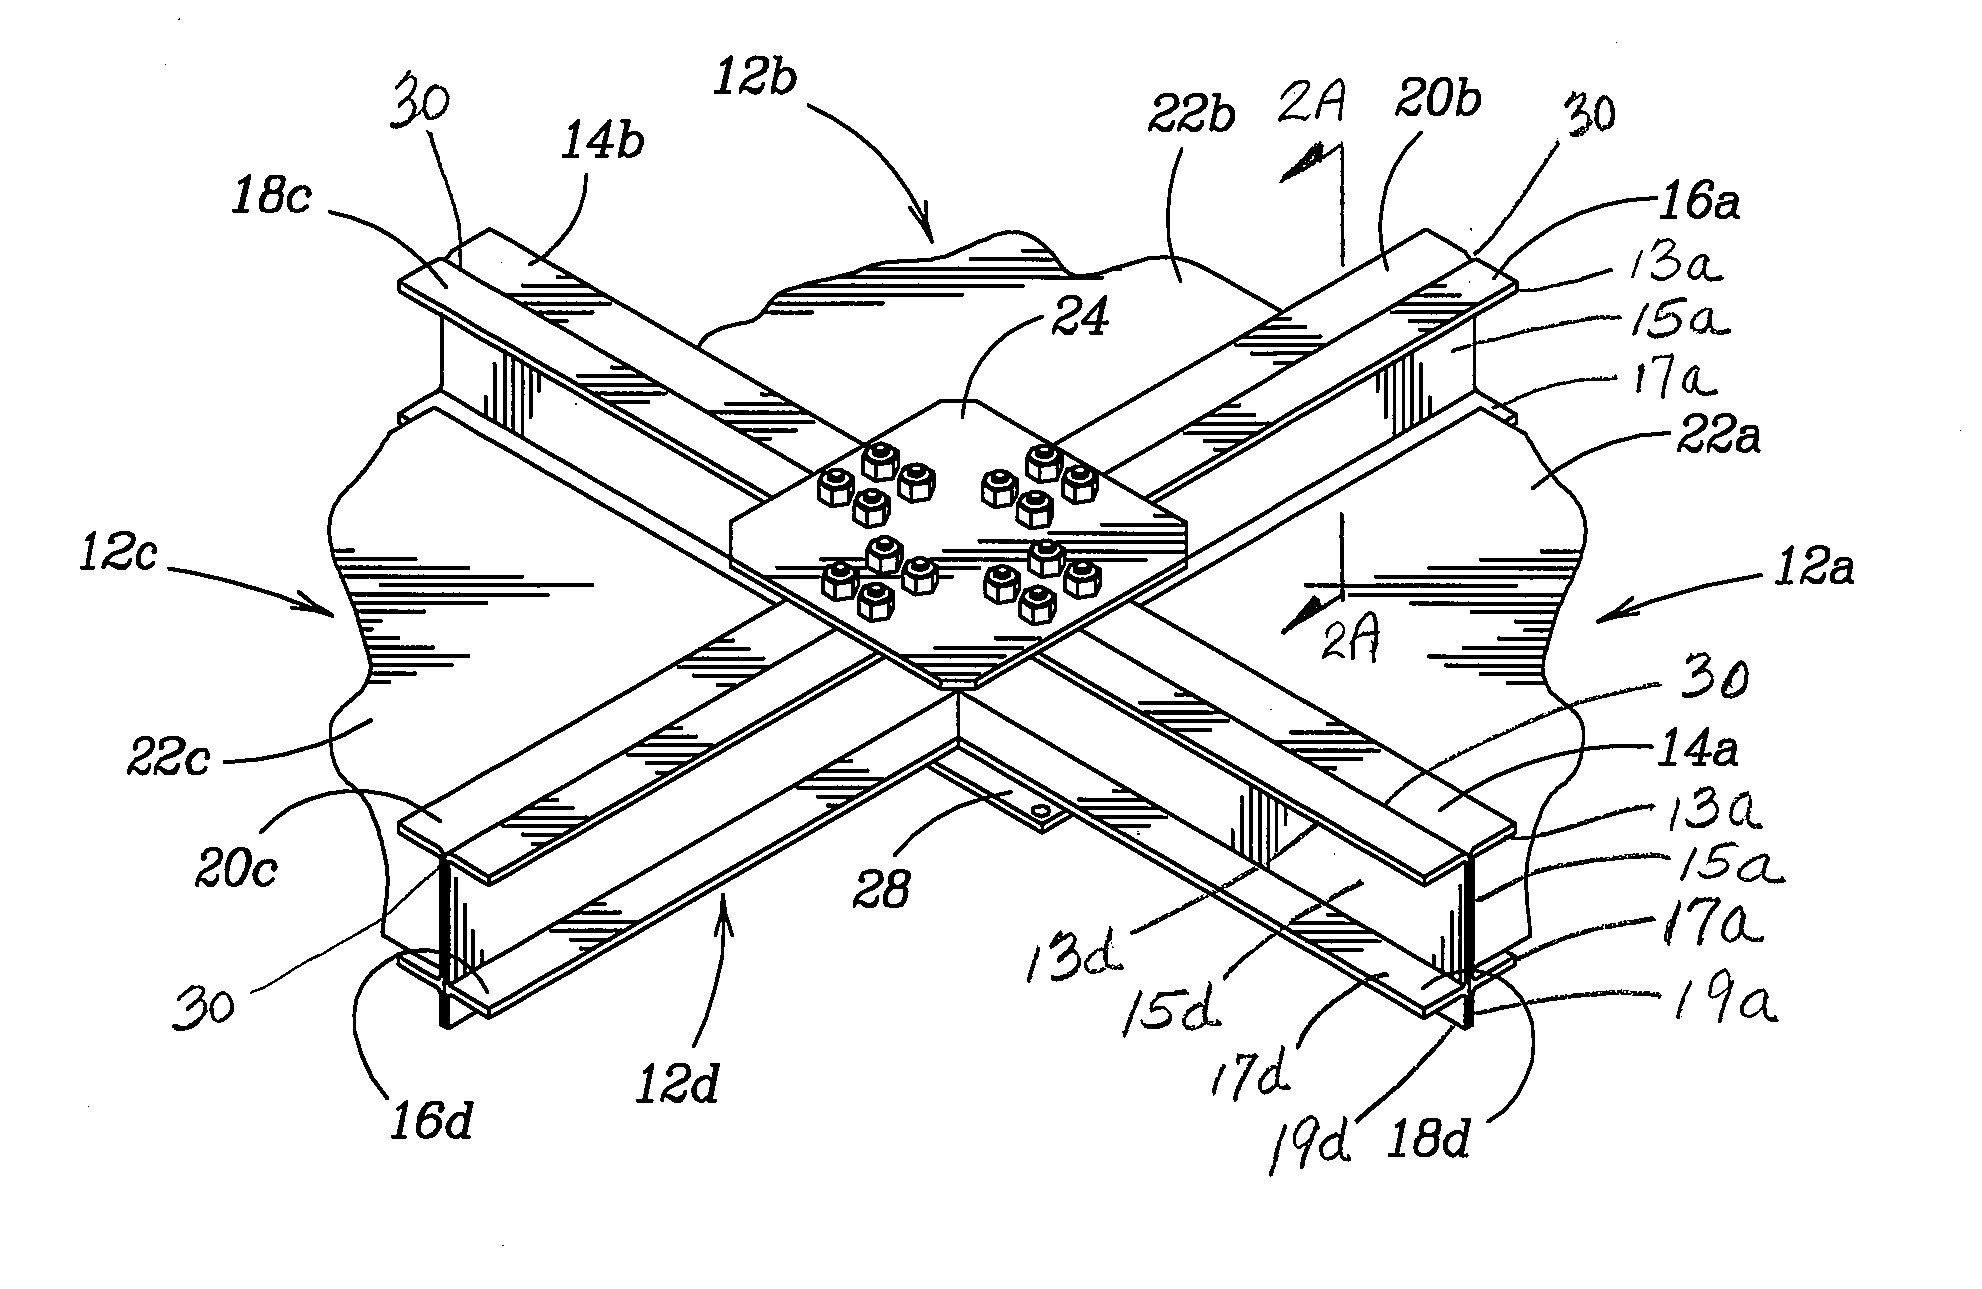 Internal Floating Roof for Covering Fluid Bodies in Storage Tanks